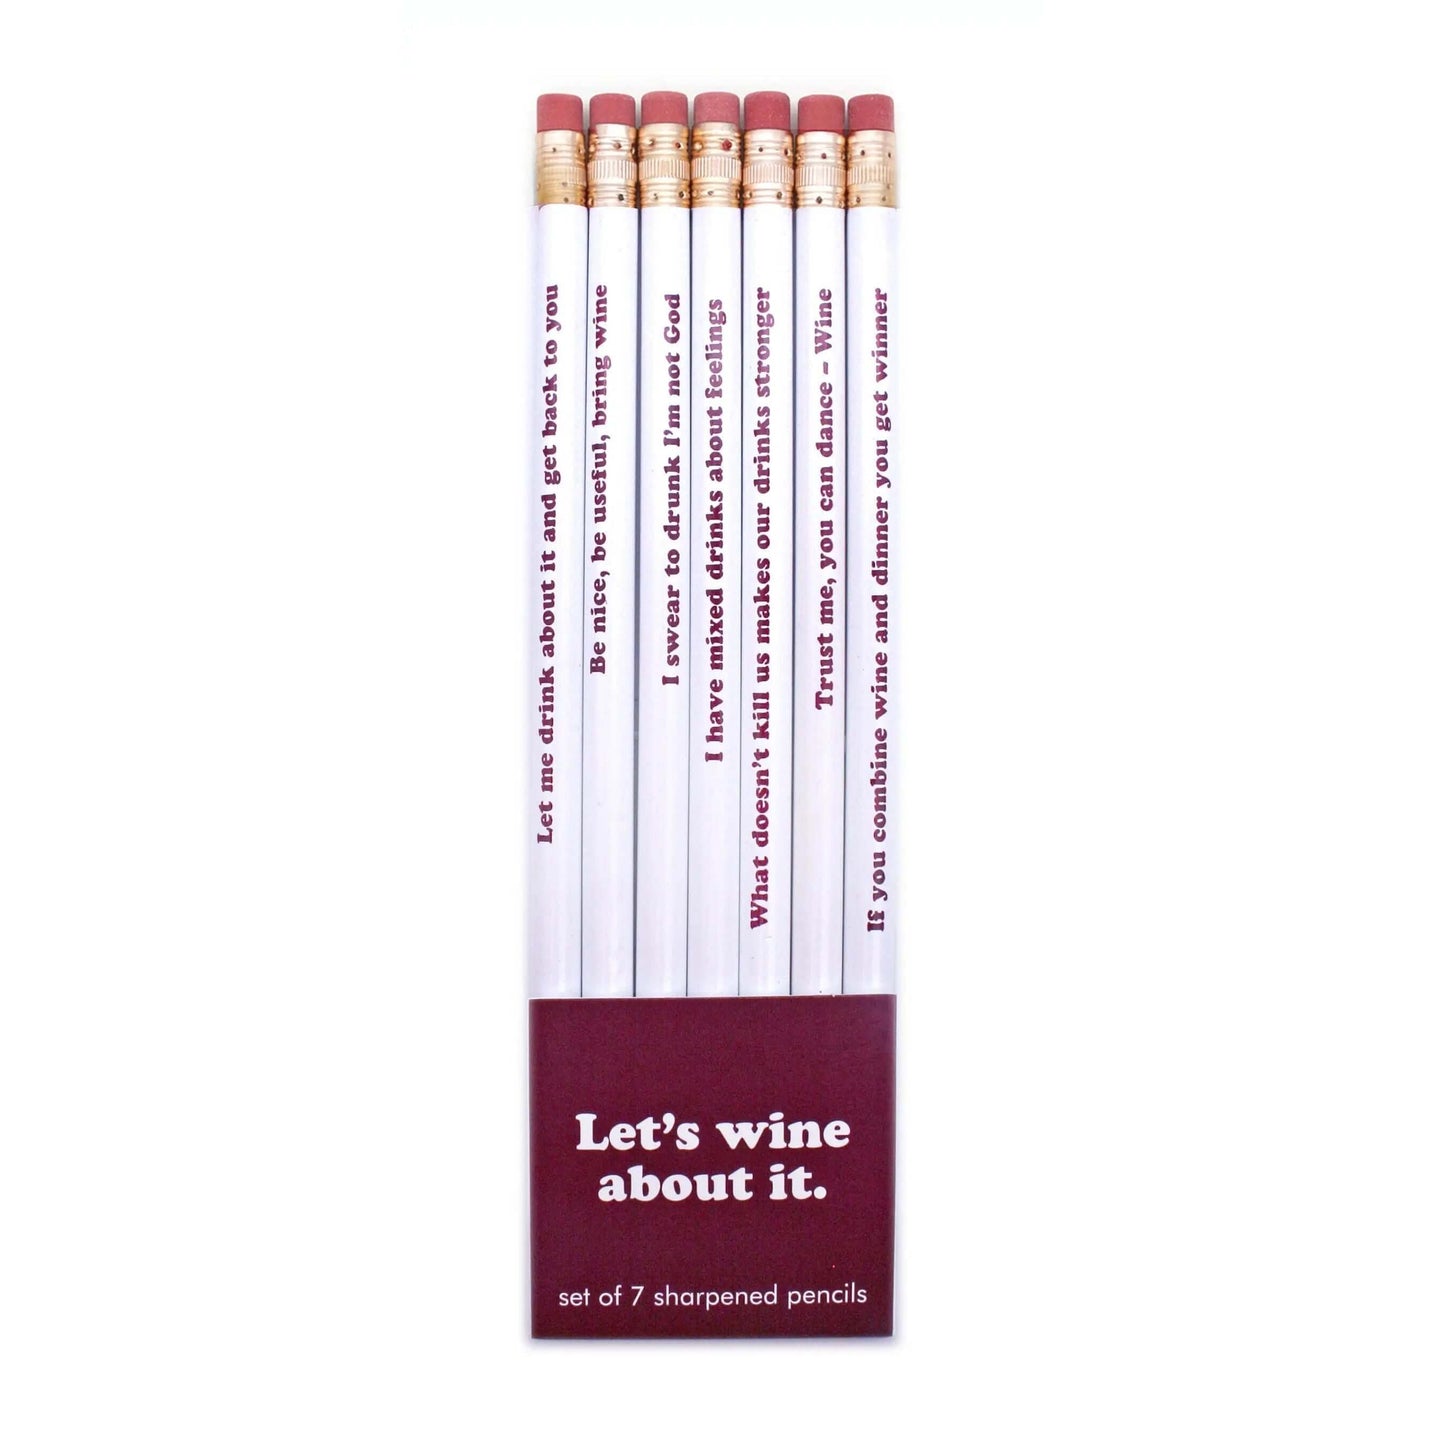 Snifty Funny Let's Wine About It Pencil Set, Pencil Sets for £4.75